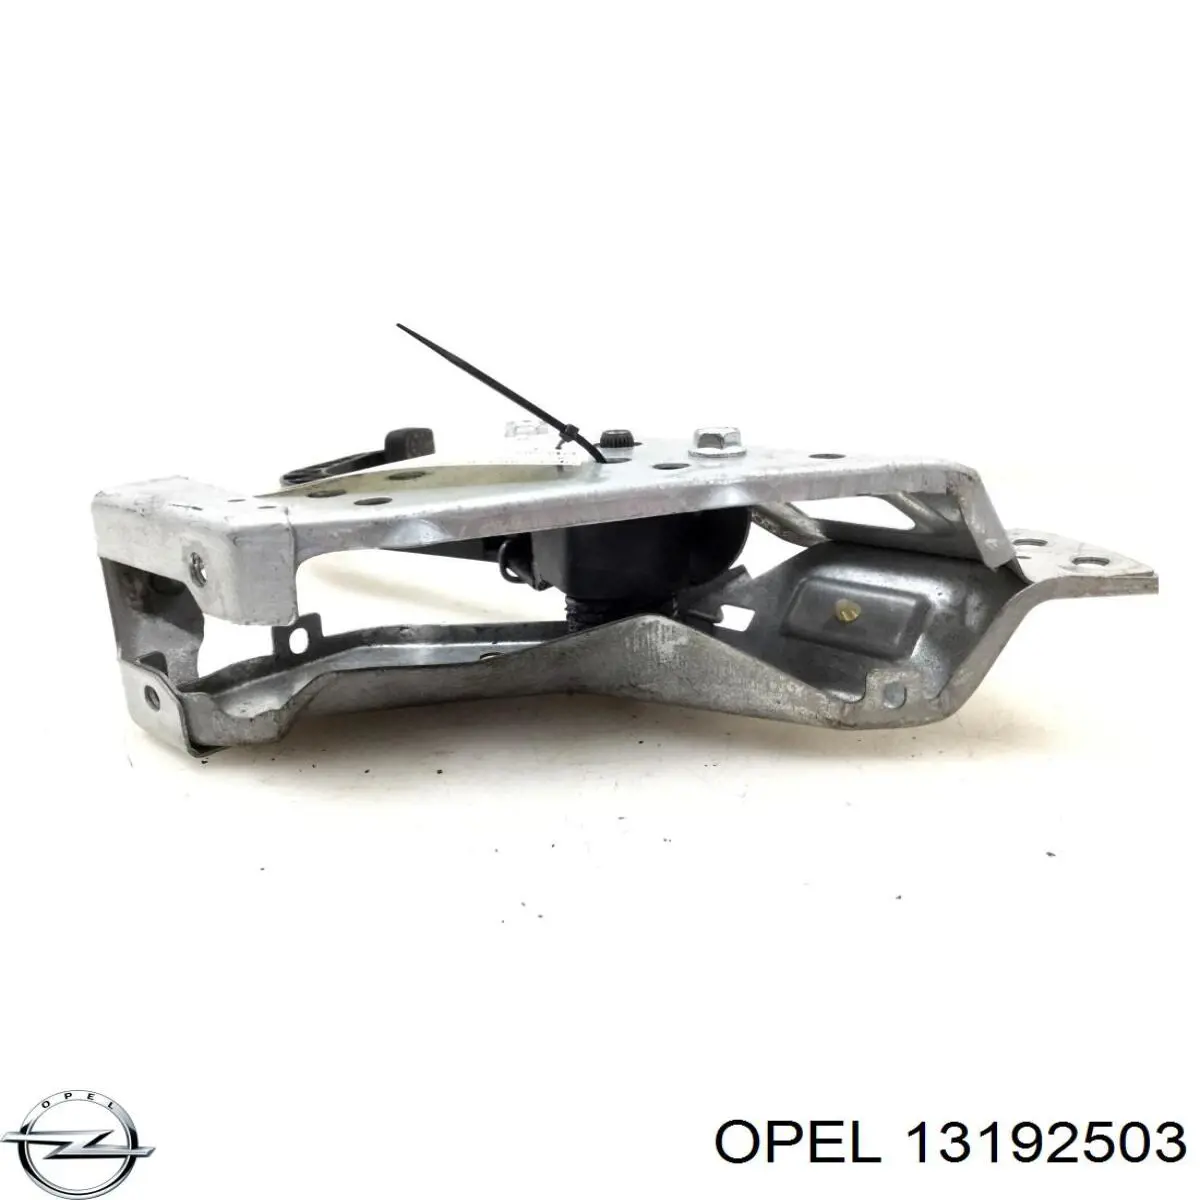 13192503 Opel pedal embrague